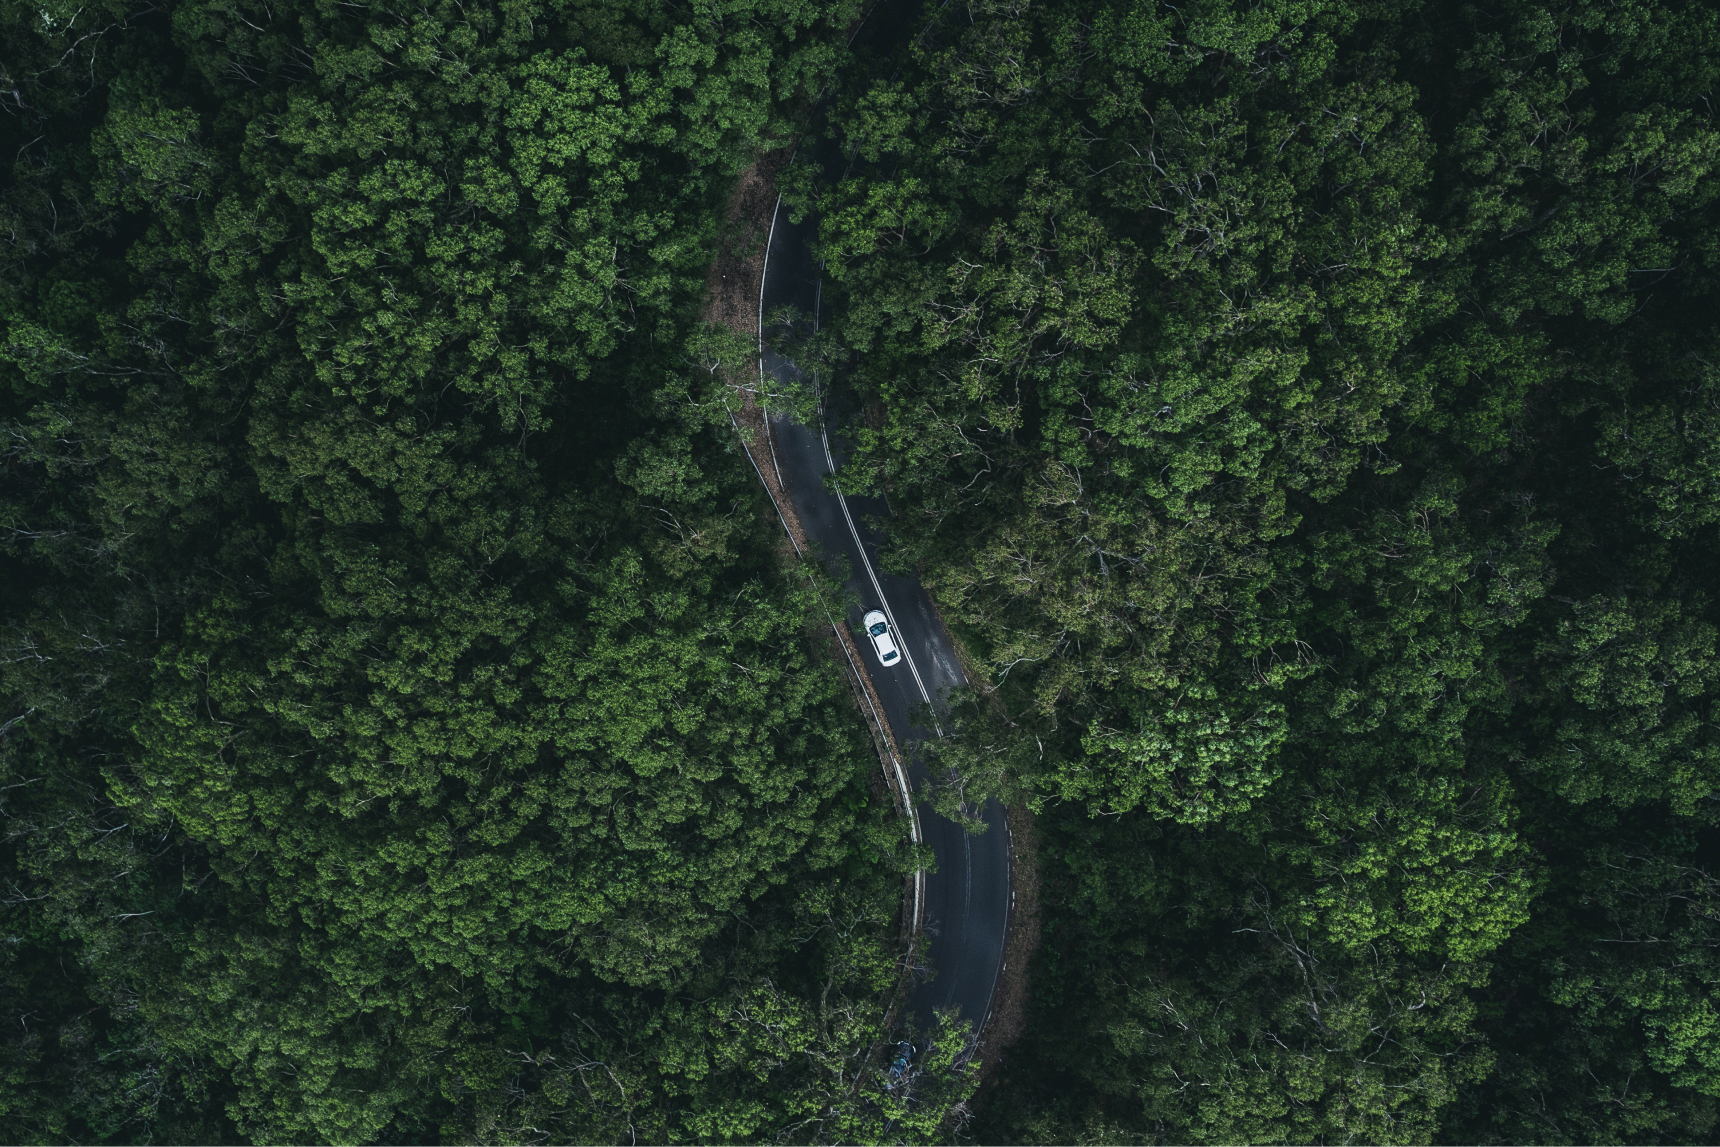 A single car driving through a winding road in a forest